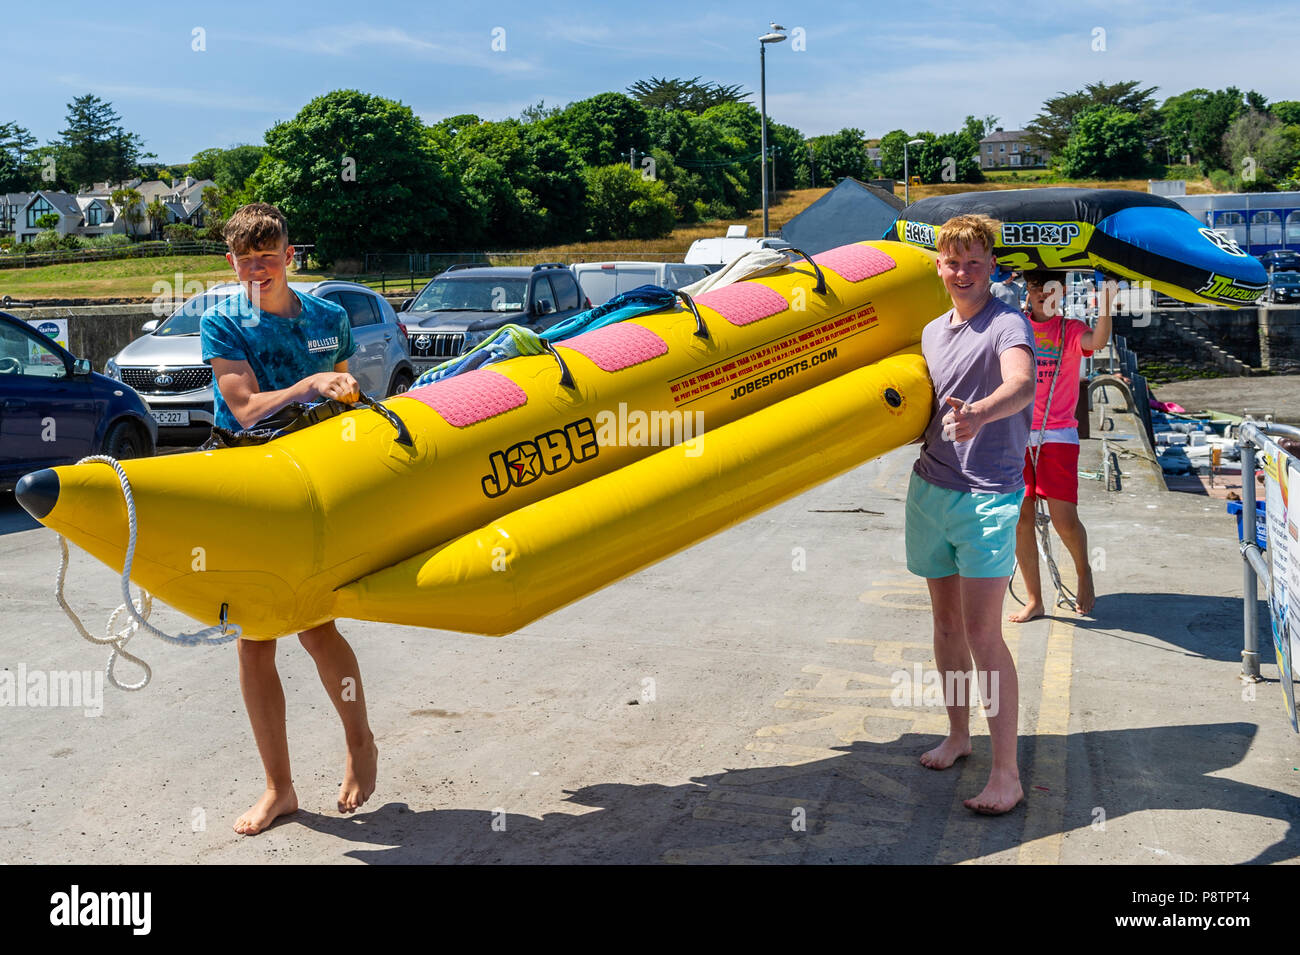 Schull, West Cork, Ireland. 13th July, 2018. Making the most of the hot weather and preparing to have some fun on towable inflatables in the water in Schull Harbour are Jamie Donnelly, Tom Casey and Jeremy Kingston, all from Cork city. The rest of the day will have highs of 20° Celsius but the rest of the weekend will be cooler with rain forecast for Sunday. Credit: Andy Gibson/Alamy Live News. Stock Photo